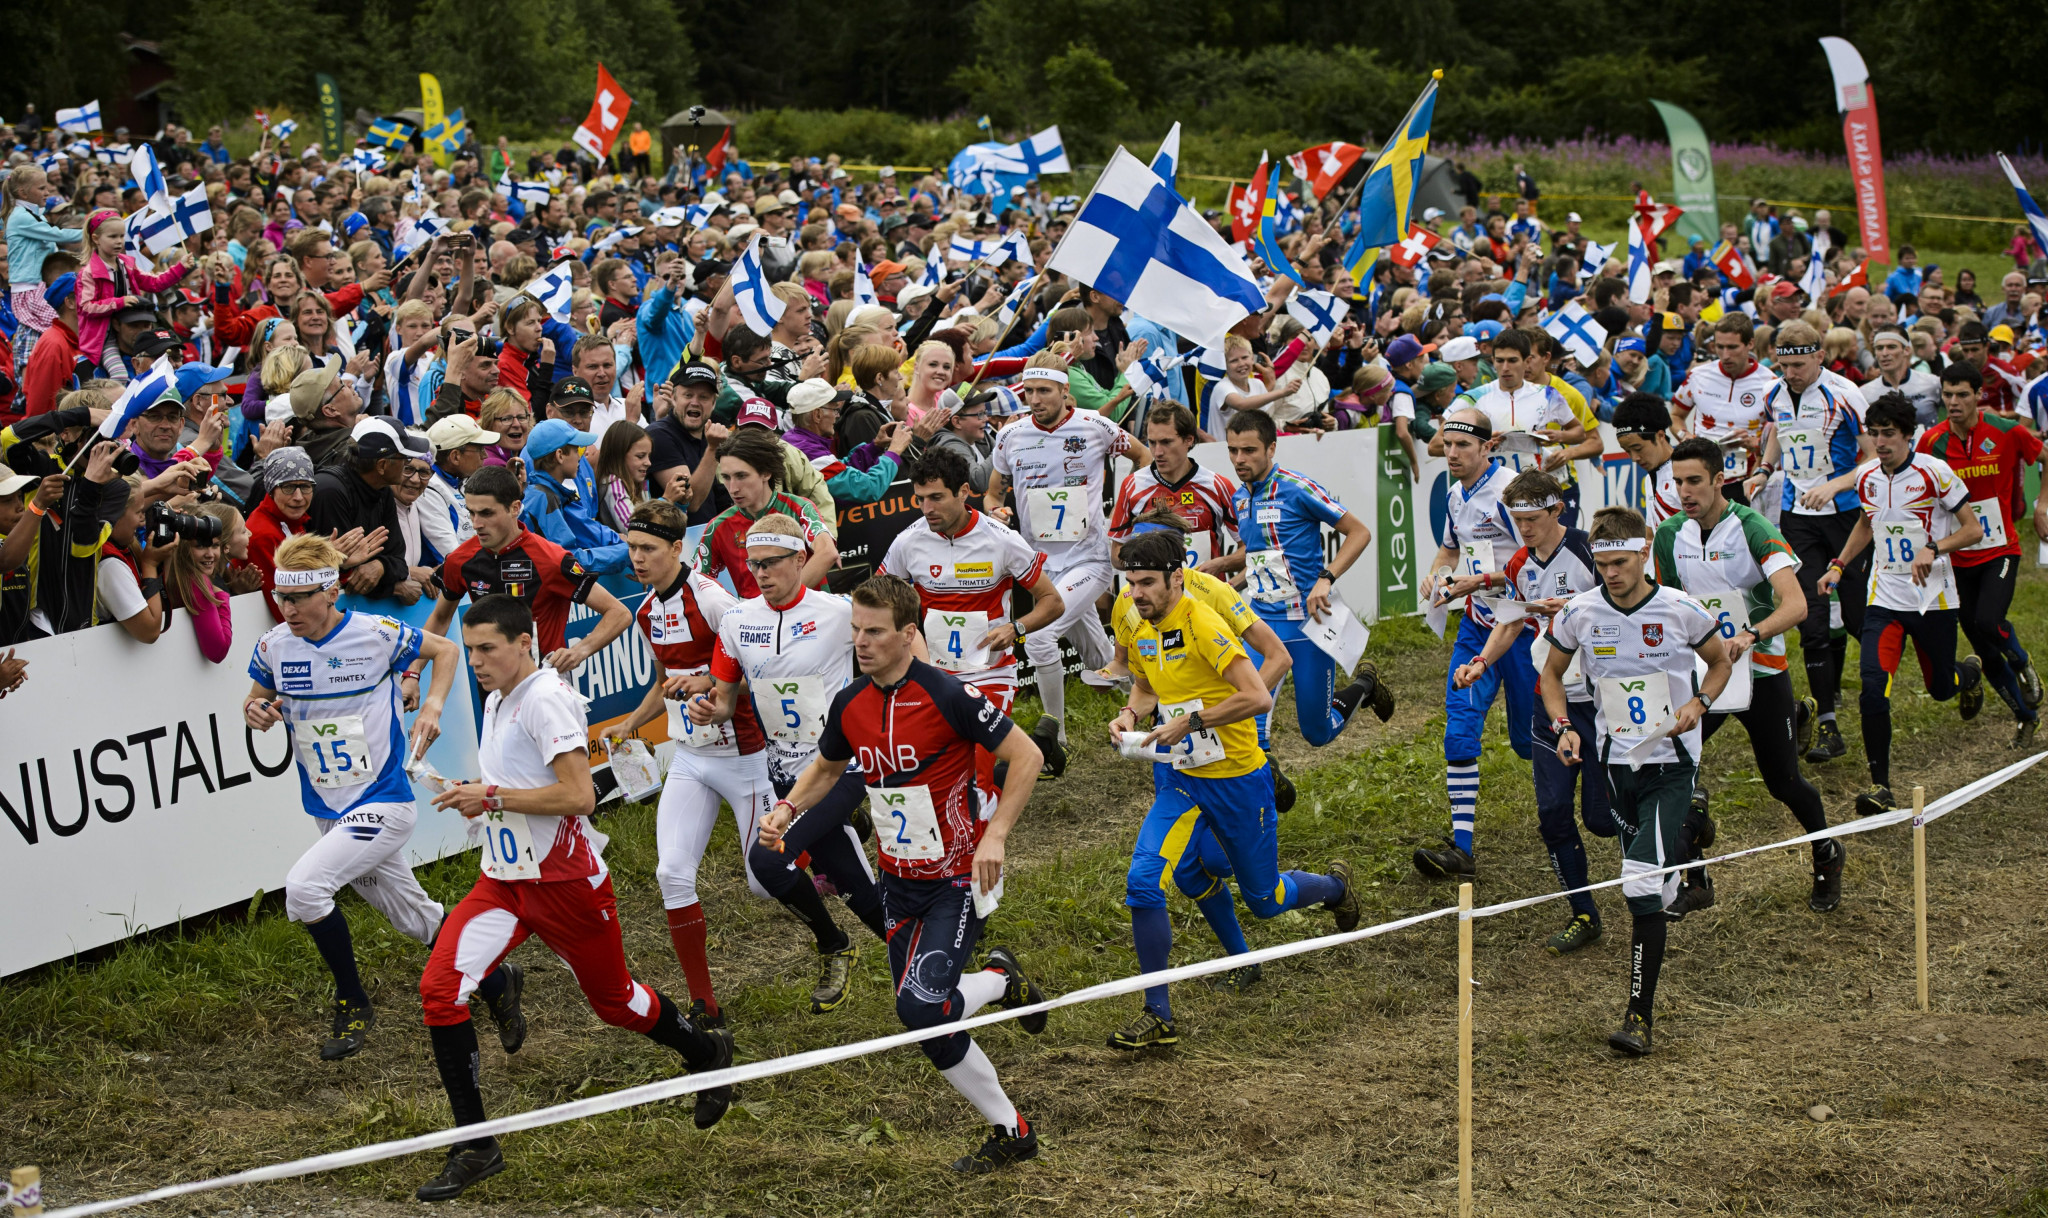 This year's World Orienteering Championships were cancelled due to the COVID-19 pandemic ©Getty Images